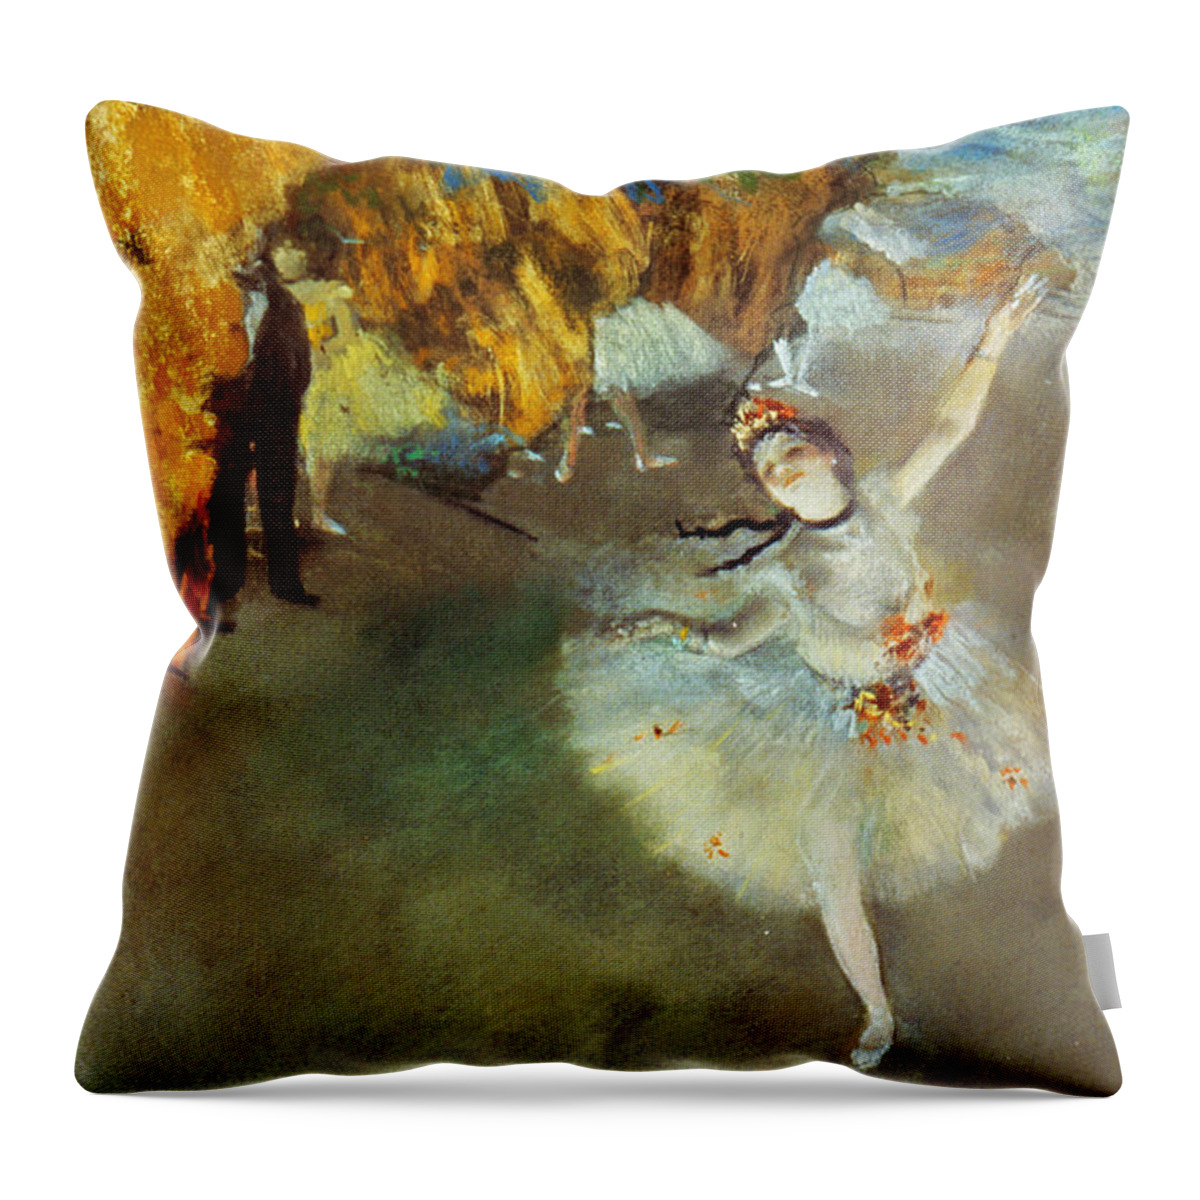 19th Century Throw Pillow featuring the painting The Star, 1876-77 by Edgar Degas